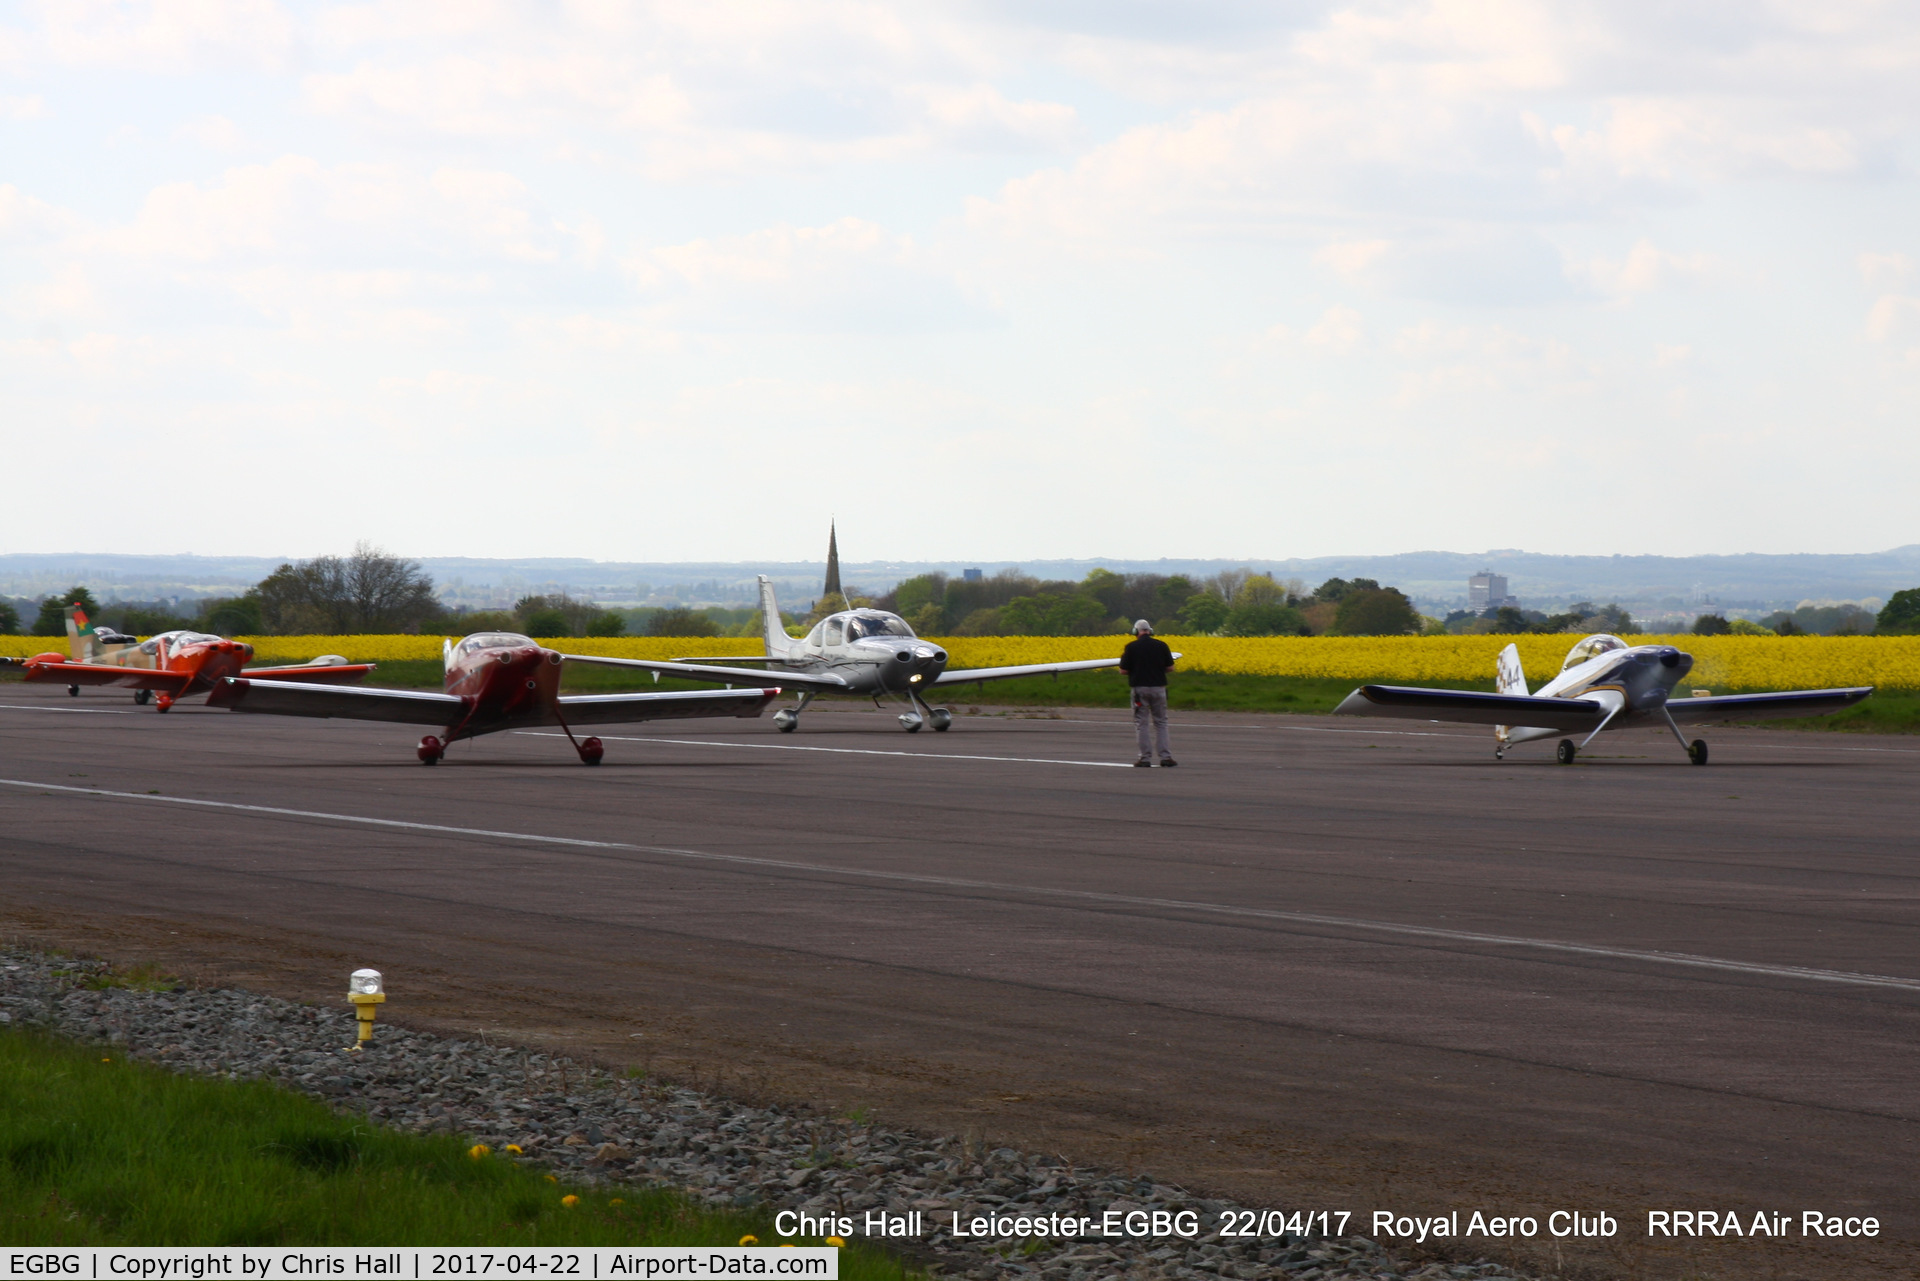 Leicester Airport, Leicester, England United Kingdom (EGBG) - on the start line for the Royal Aero Club 3R's air race at Leicester